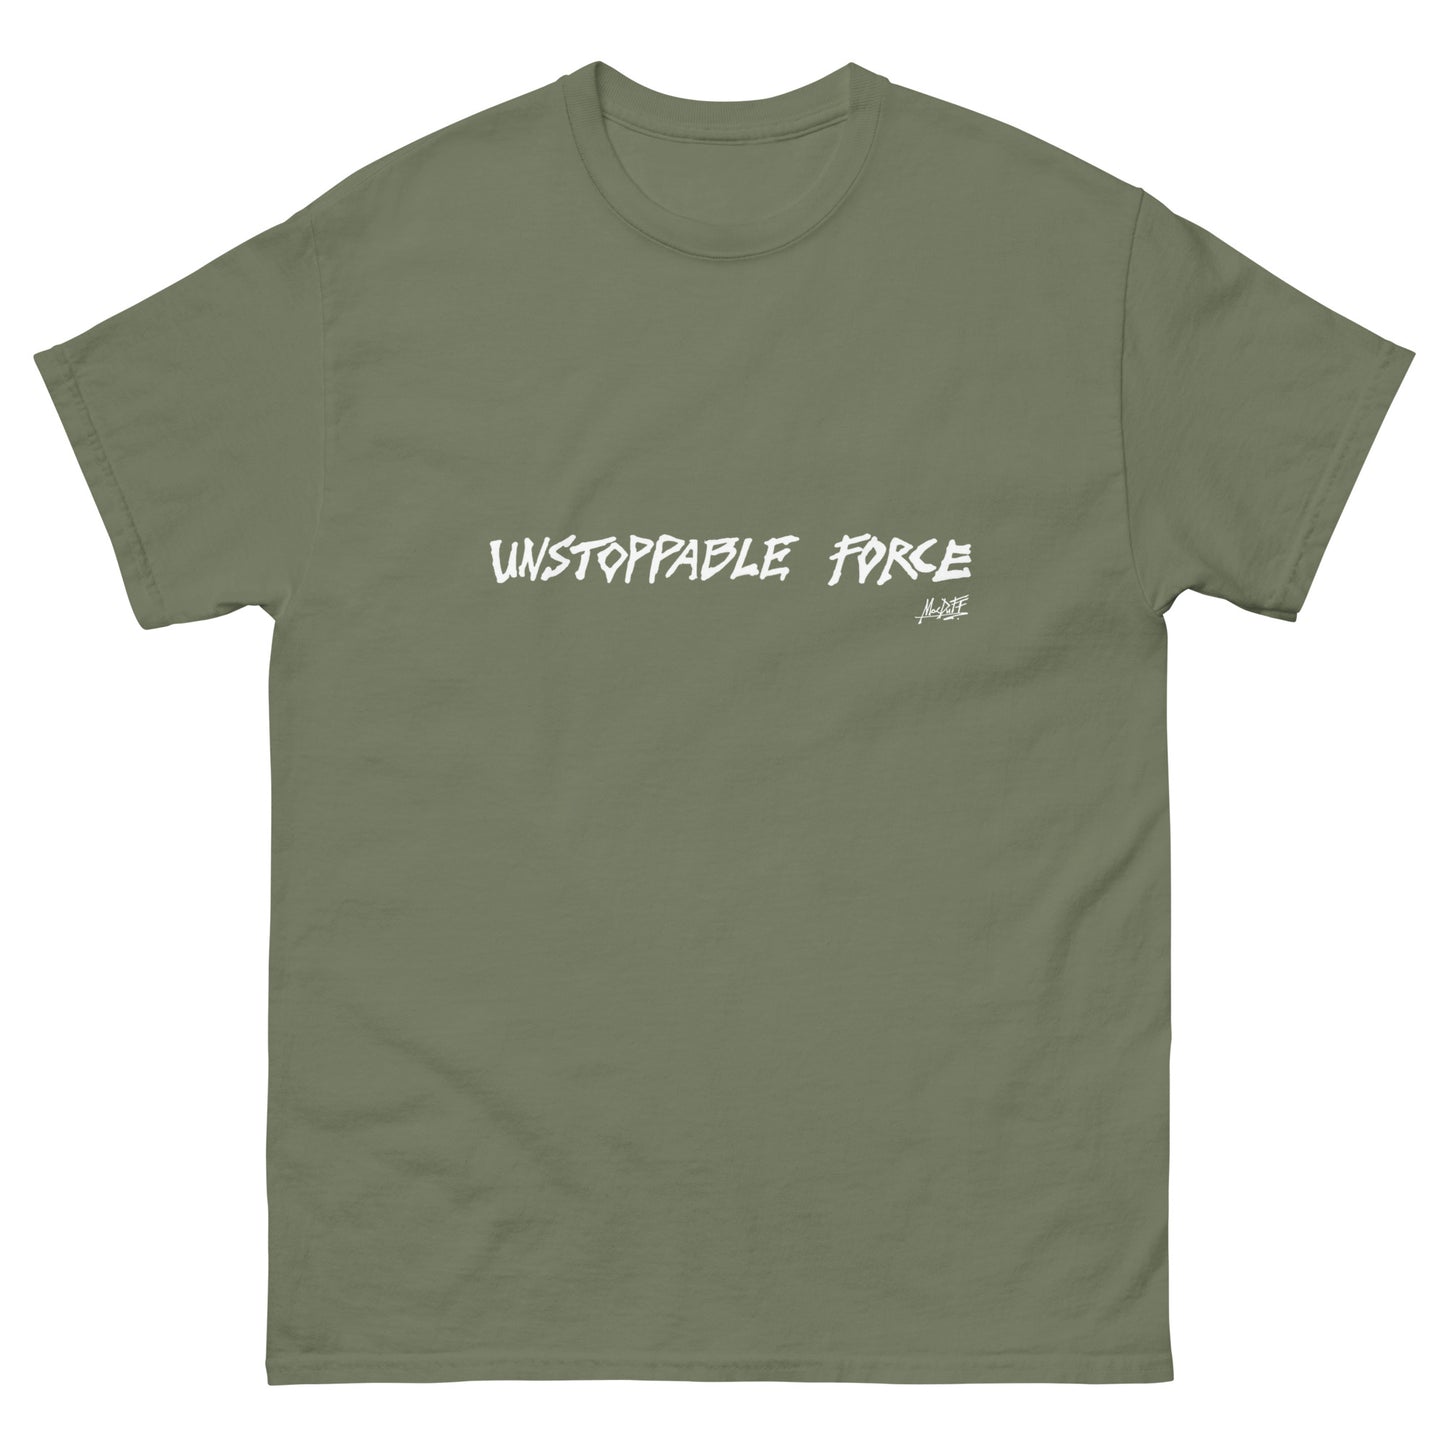 The Unstoppable Force T